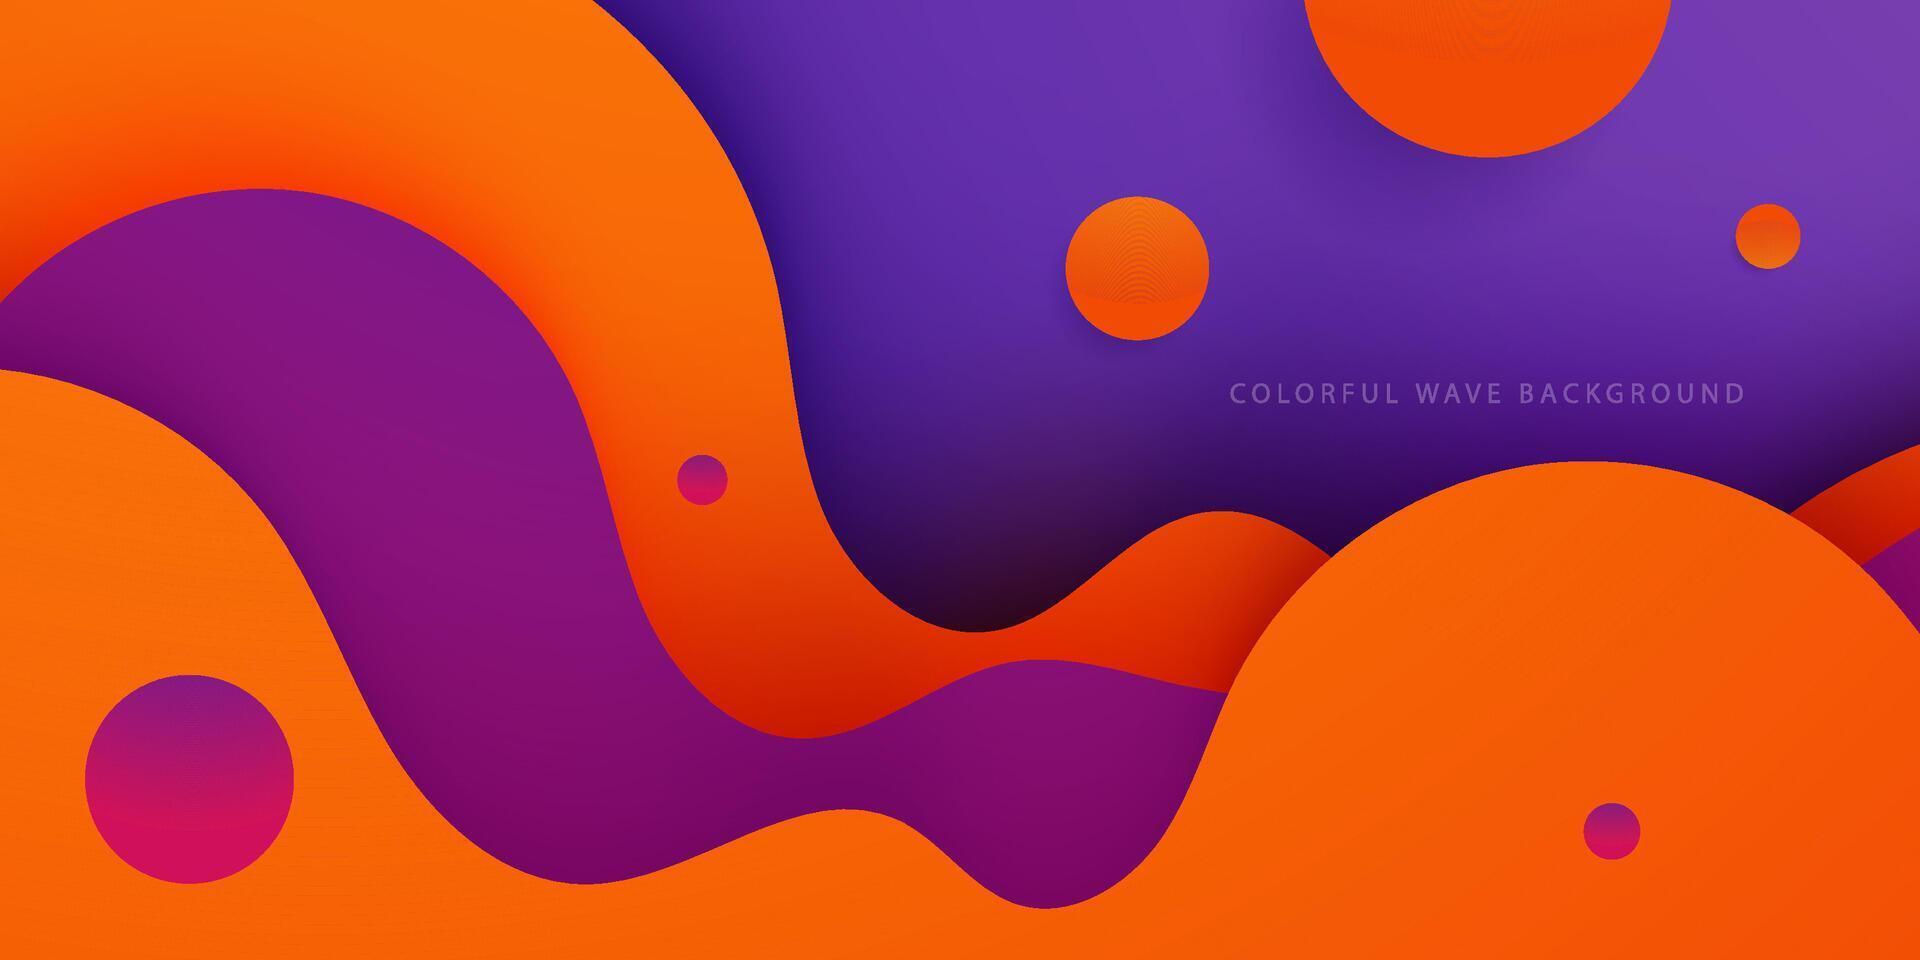 Colorful wave abstract background with gradient orange and purple soft color on background. Eps10 vector